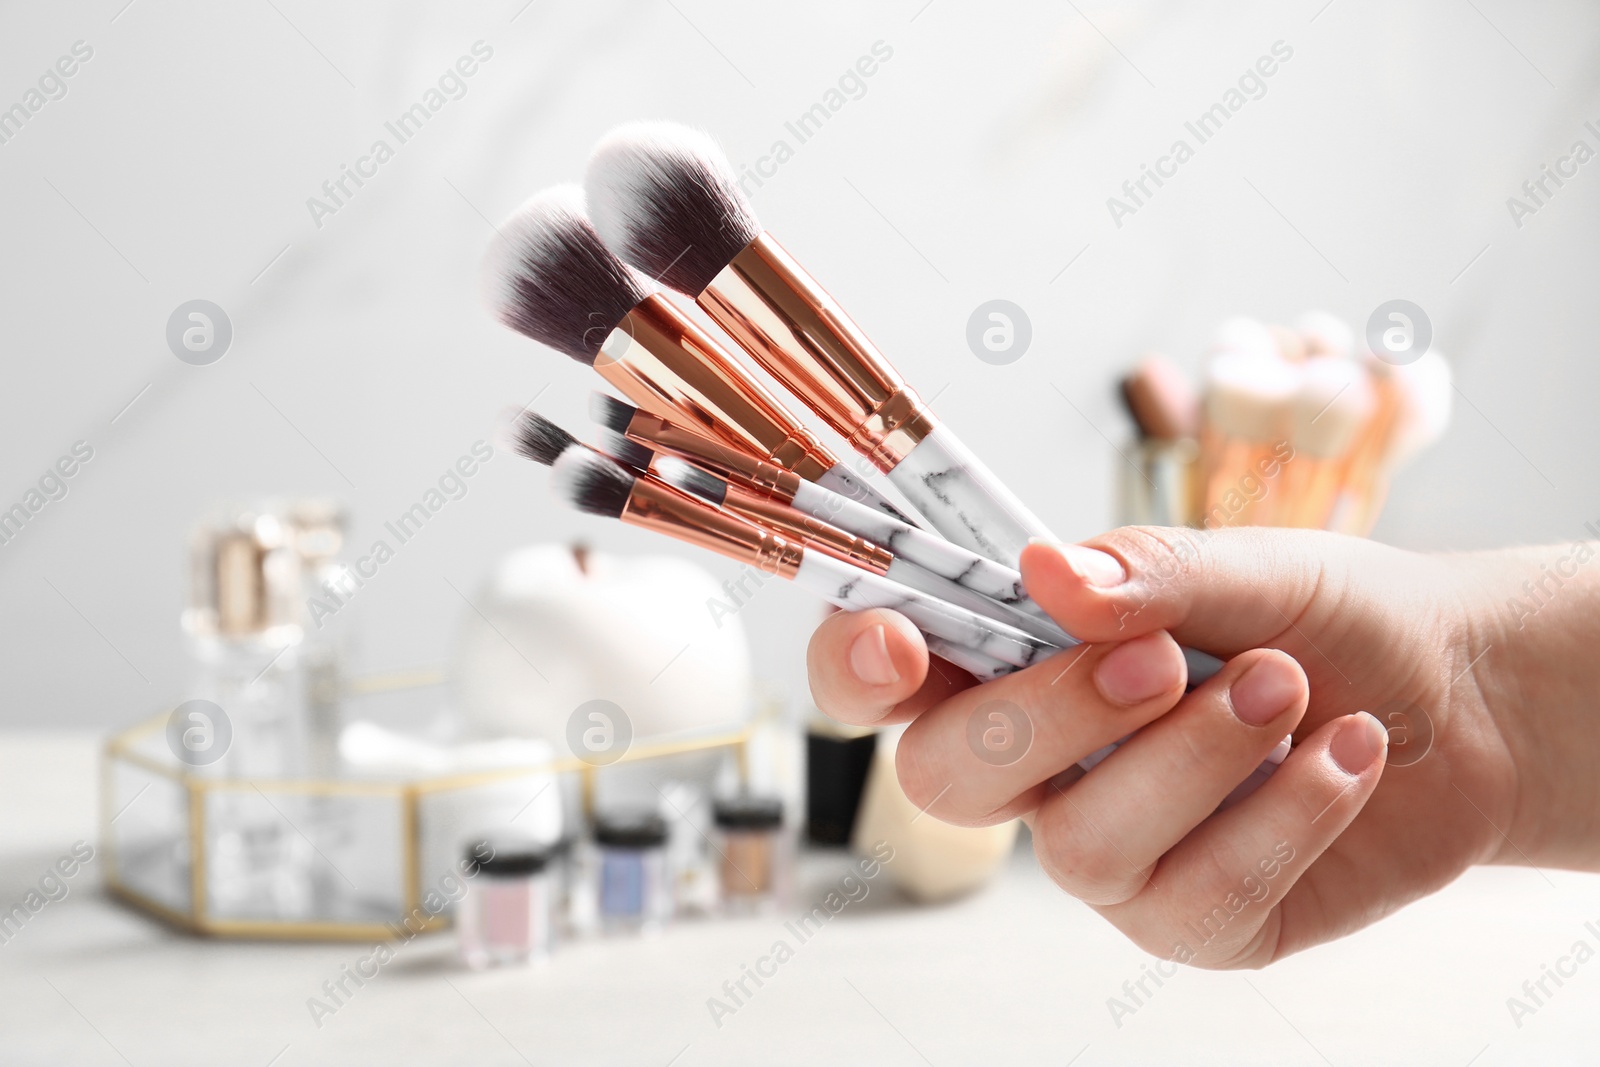 Photo of Woman holding set of makeup brushes on blurred background, closeup